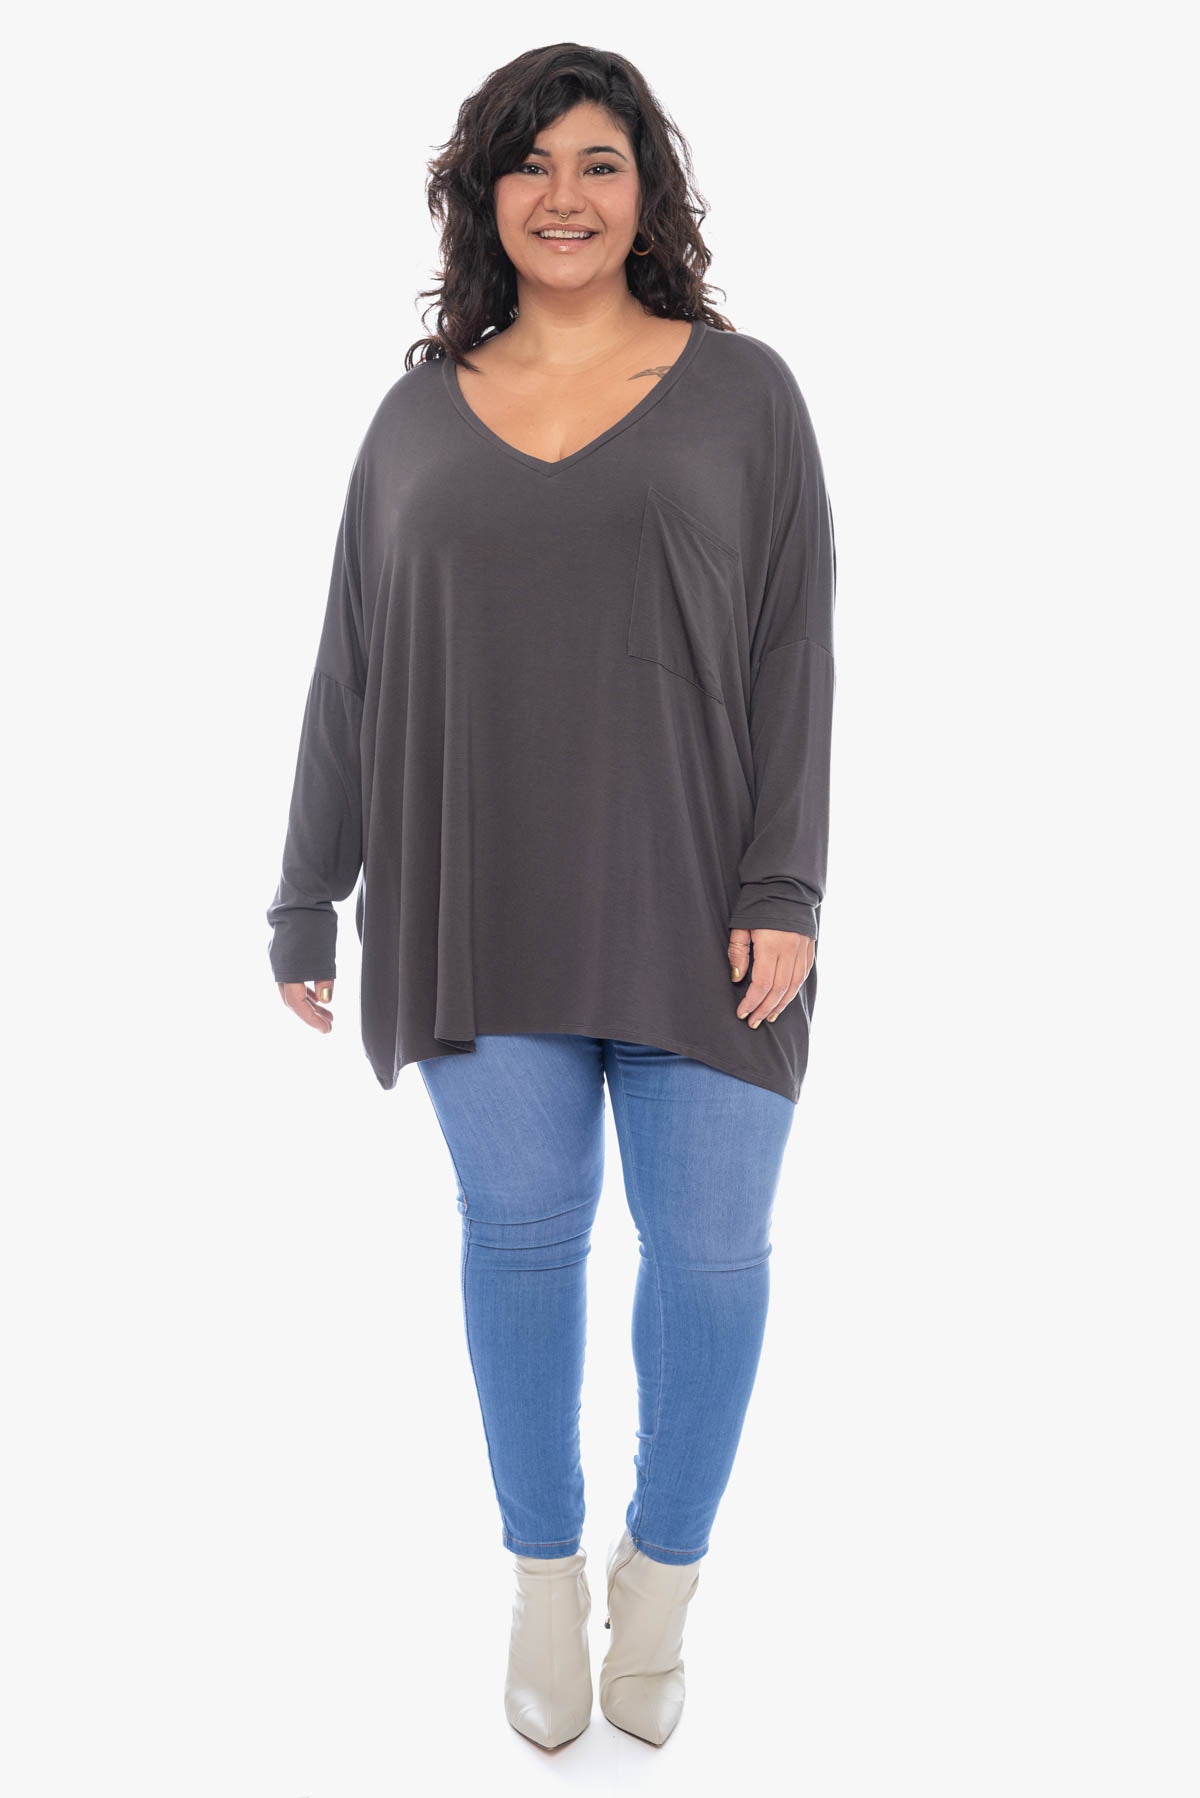 SHAWN V oversized top